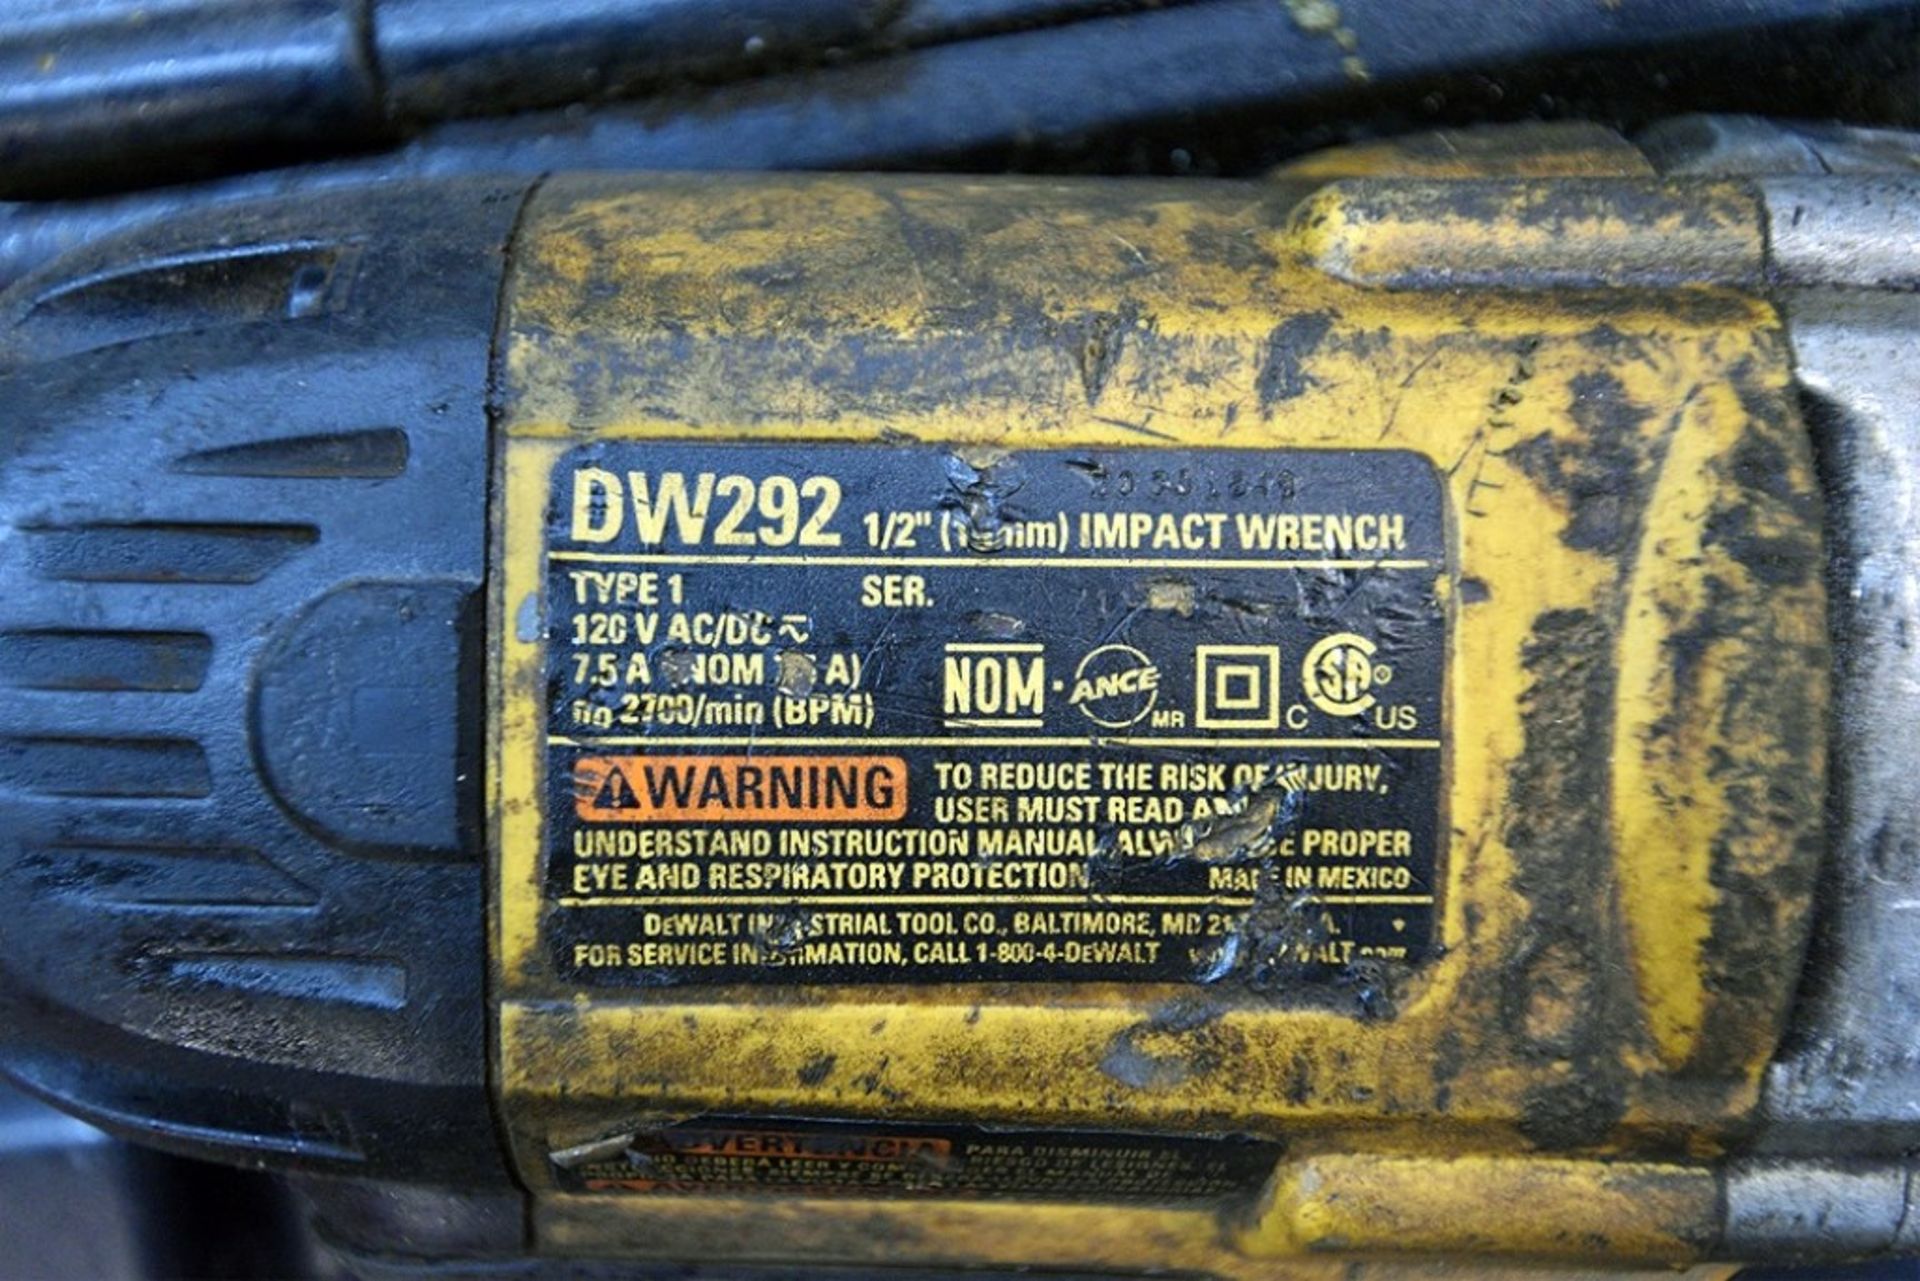 DeWalt DW292 1/2" Corded Impact Wrench w/ Case - Image 3 of 4